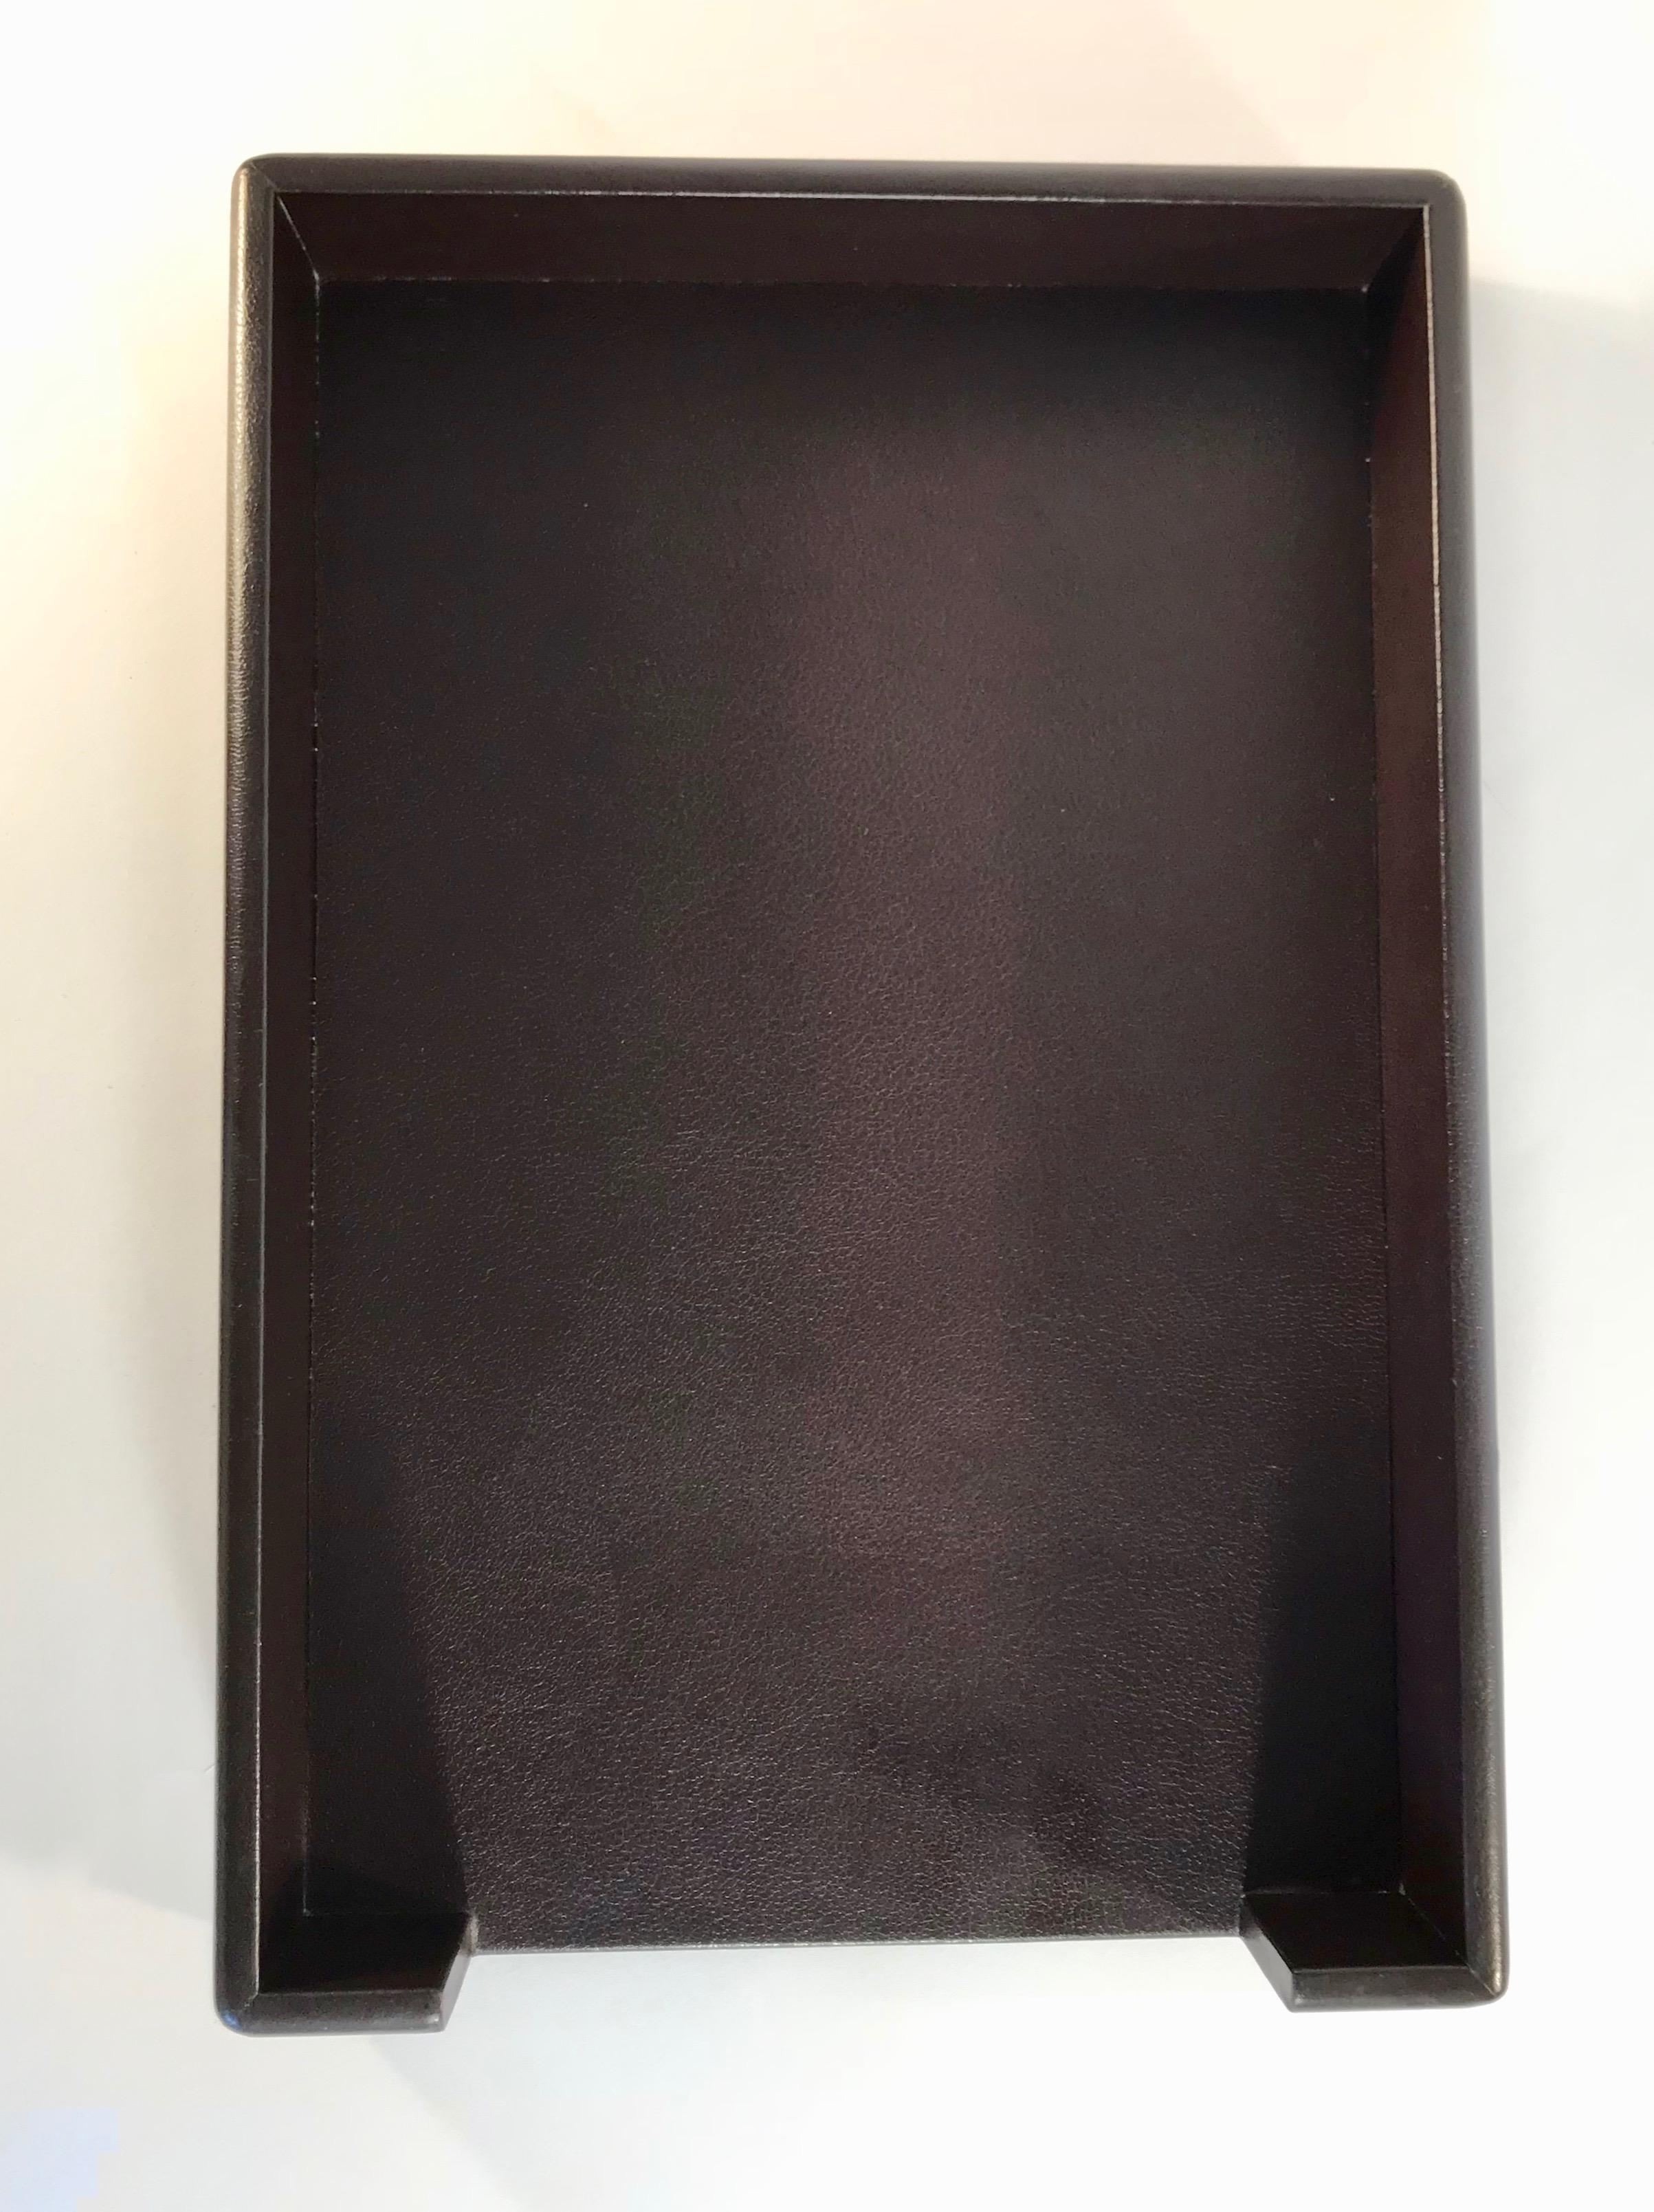 Knoll Leather Wrapped Leather Paper Desk Tray by Smokador in Chocolate Brown 1